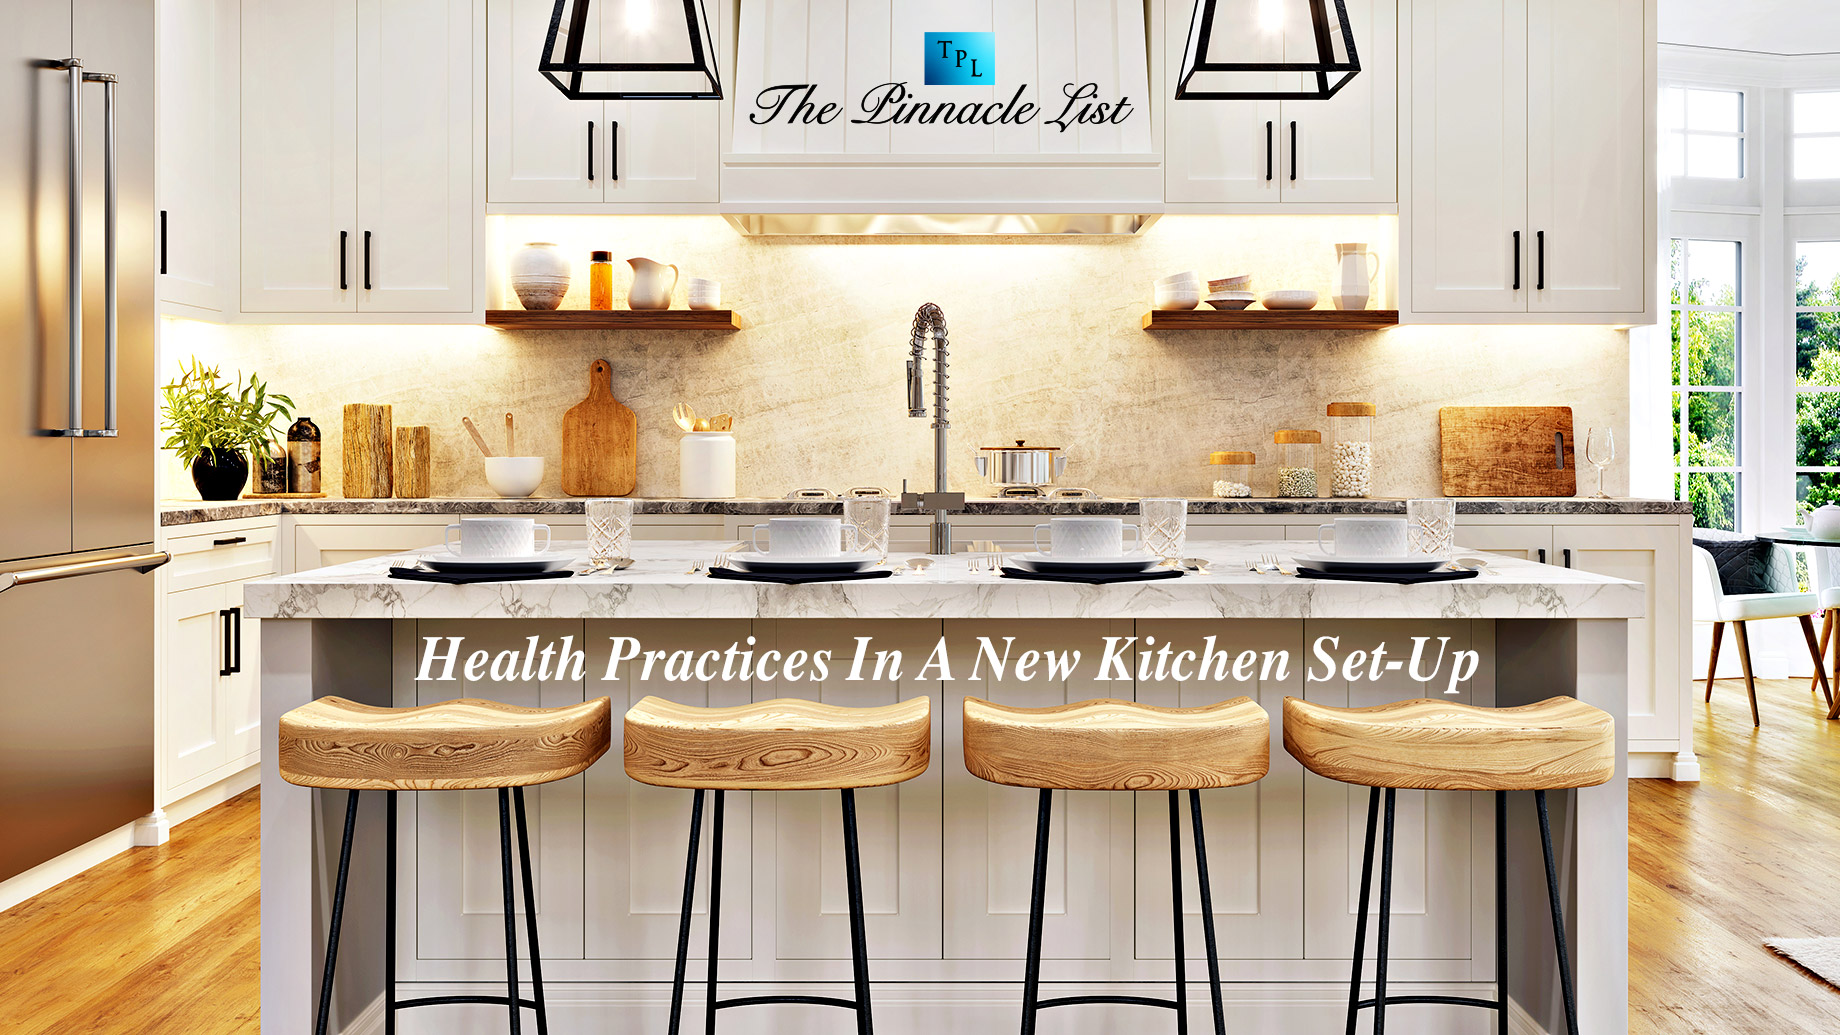 Health Practices In A New Kitchen Set-Up